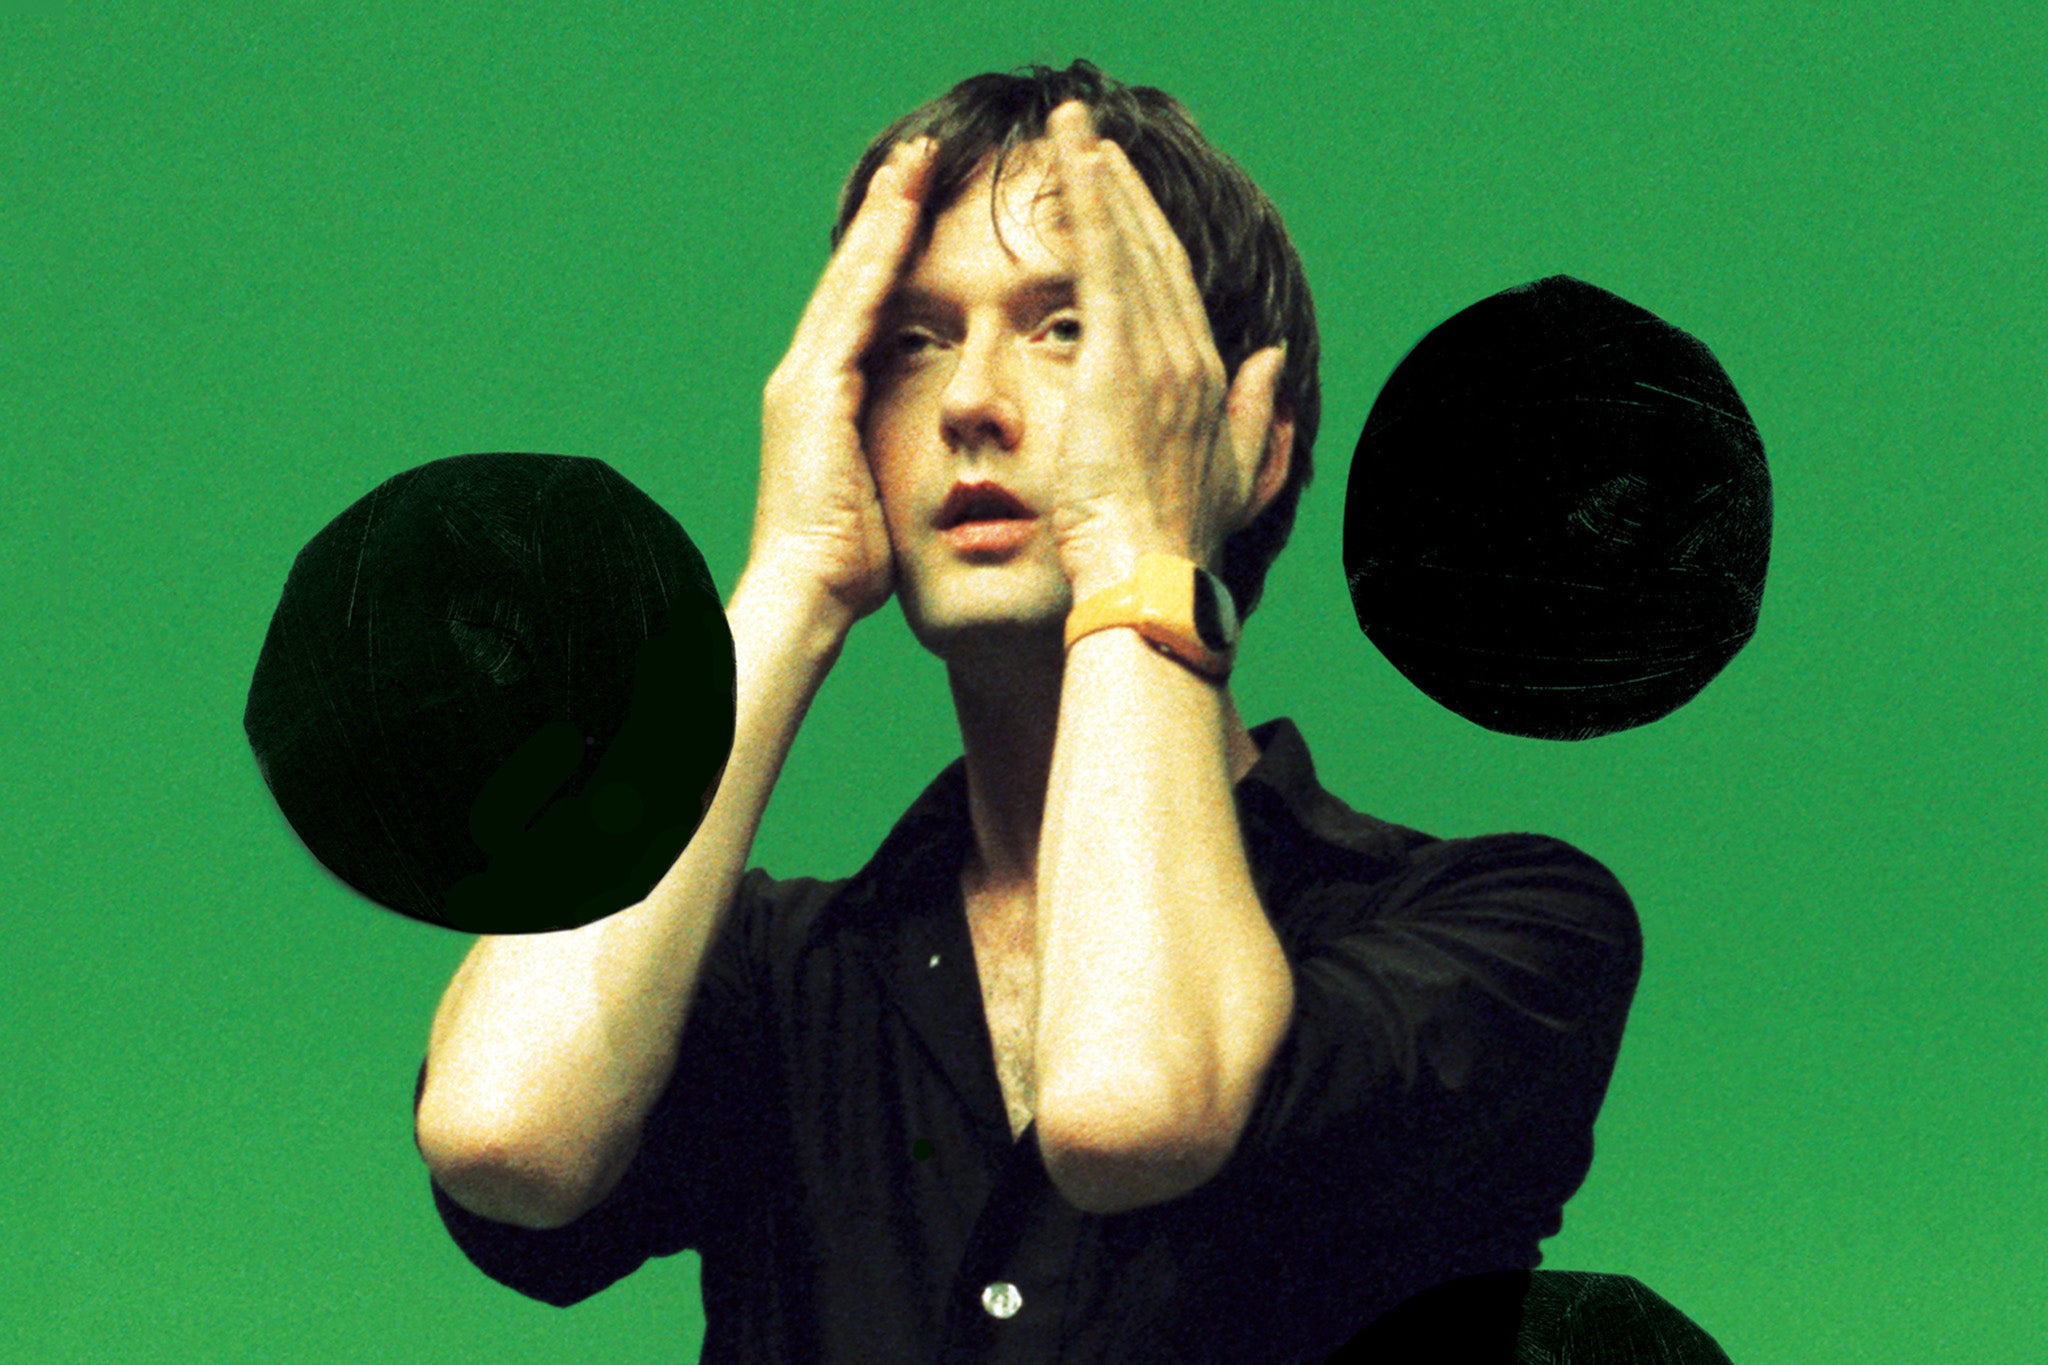 Jarvis Cocker in front of a green screen during the ‘Party Hard’ video shoot, August 1998